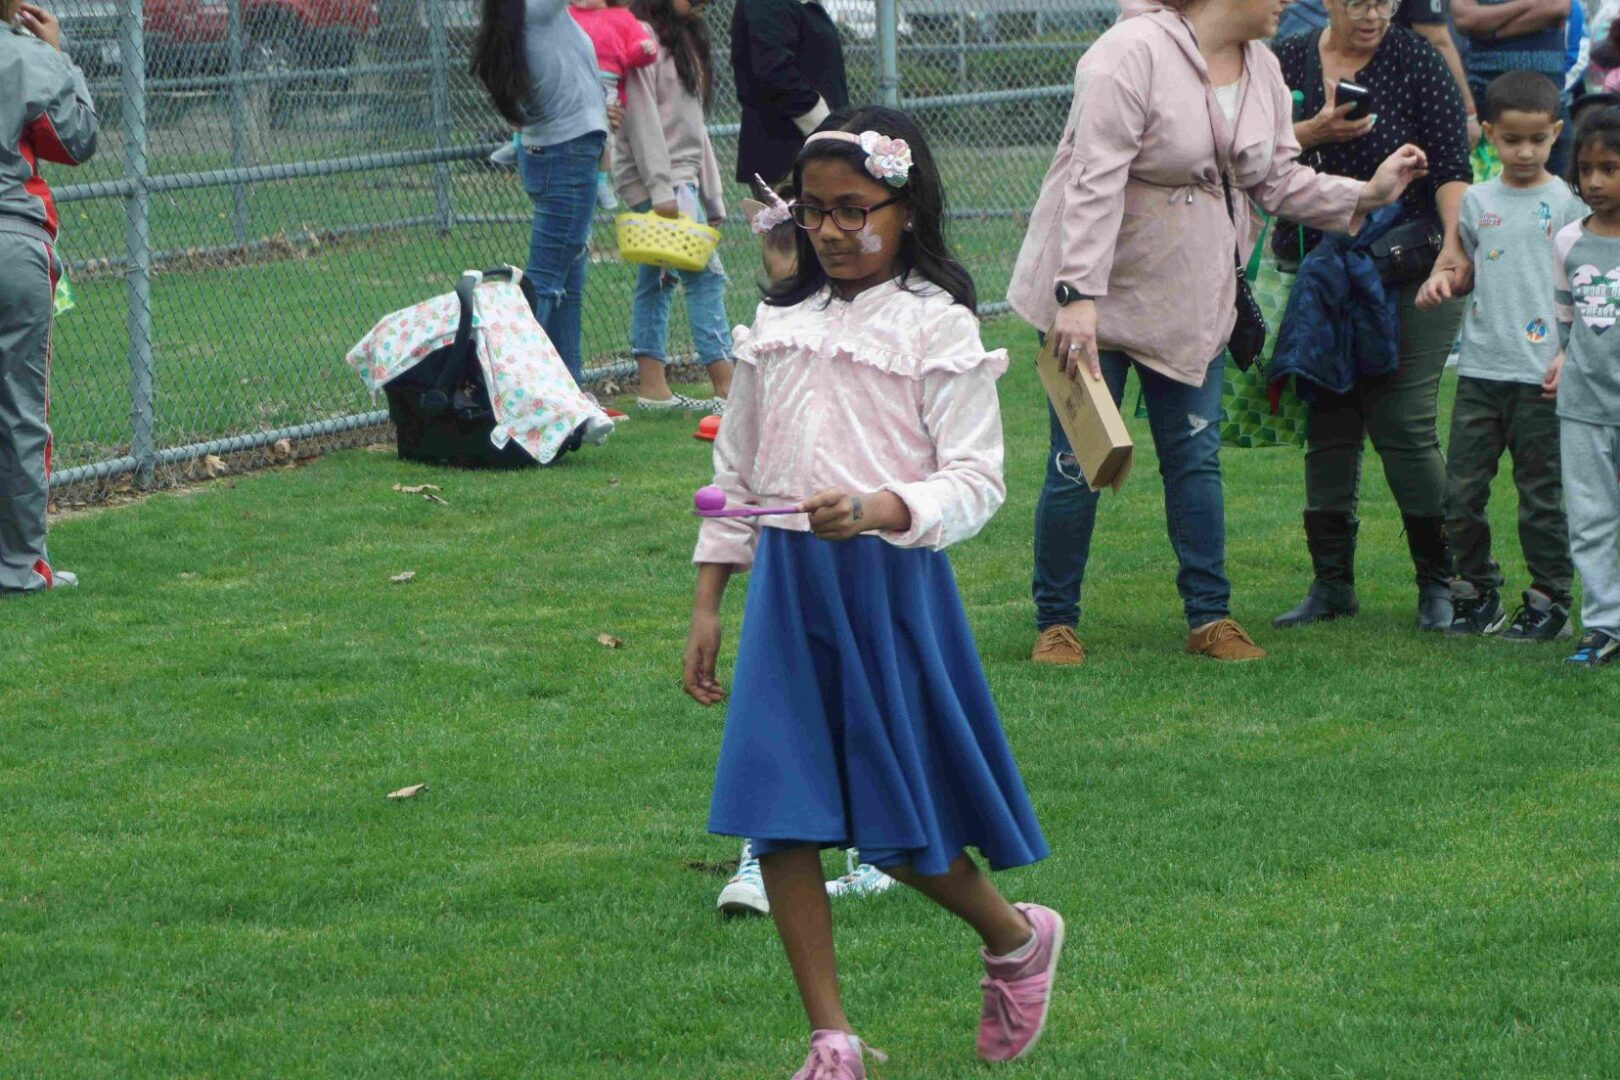 A girl wearing glasses, pink top, and a blue skirt, walking